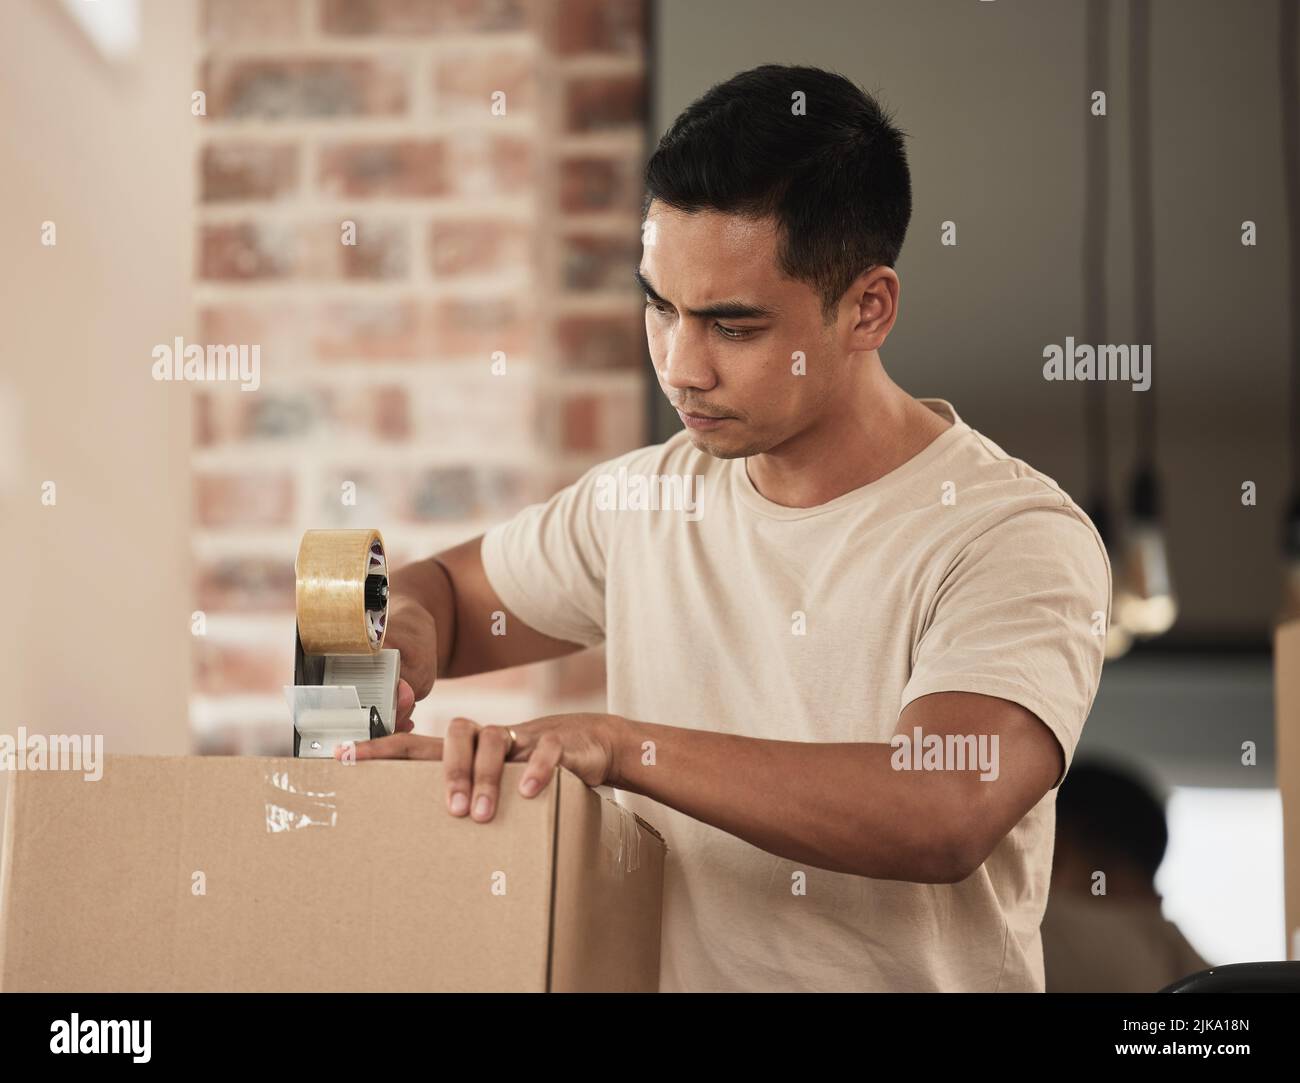 Sometimes its necessary to move house. a young man packing up to move in a room at home. Stock Photo